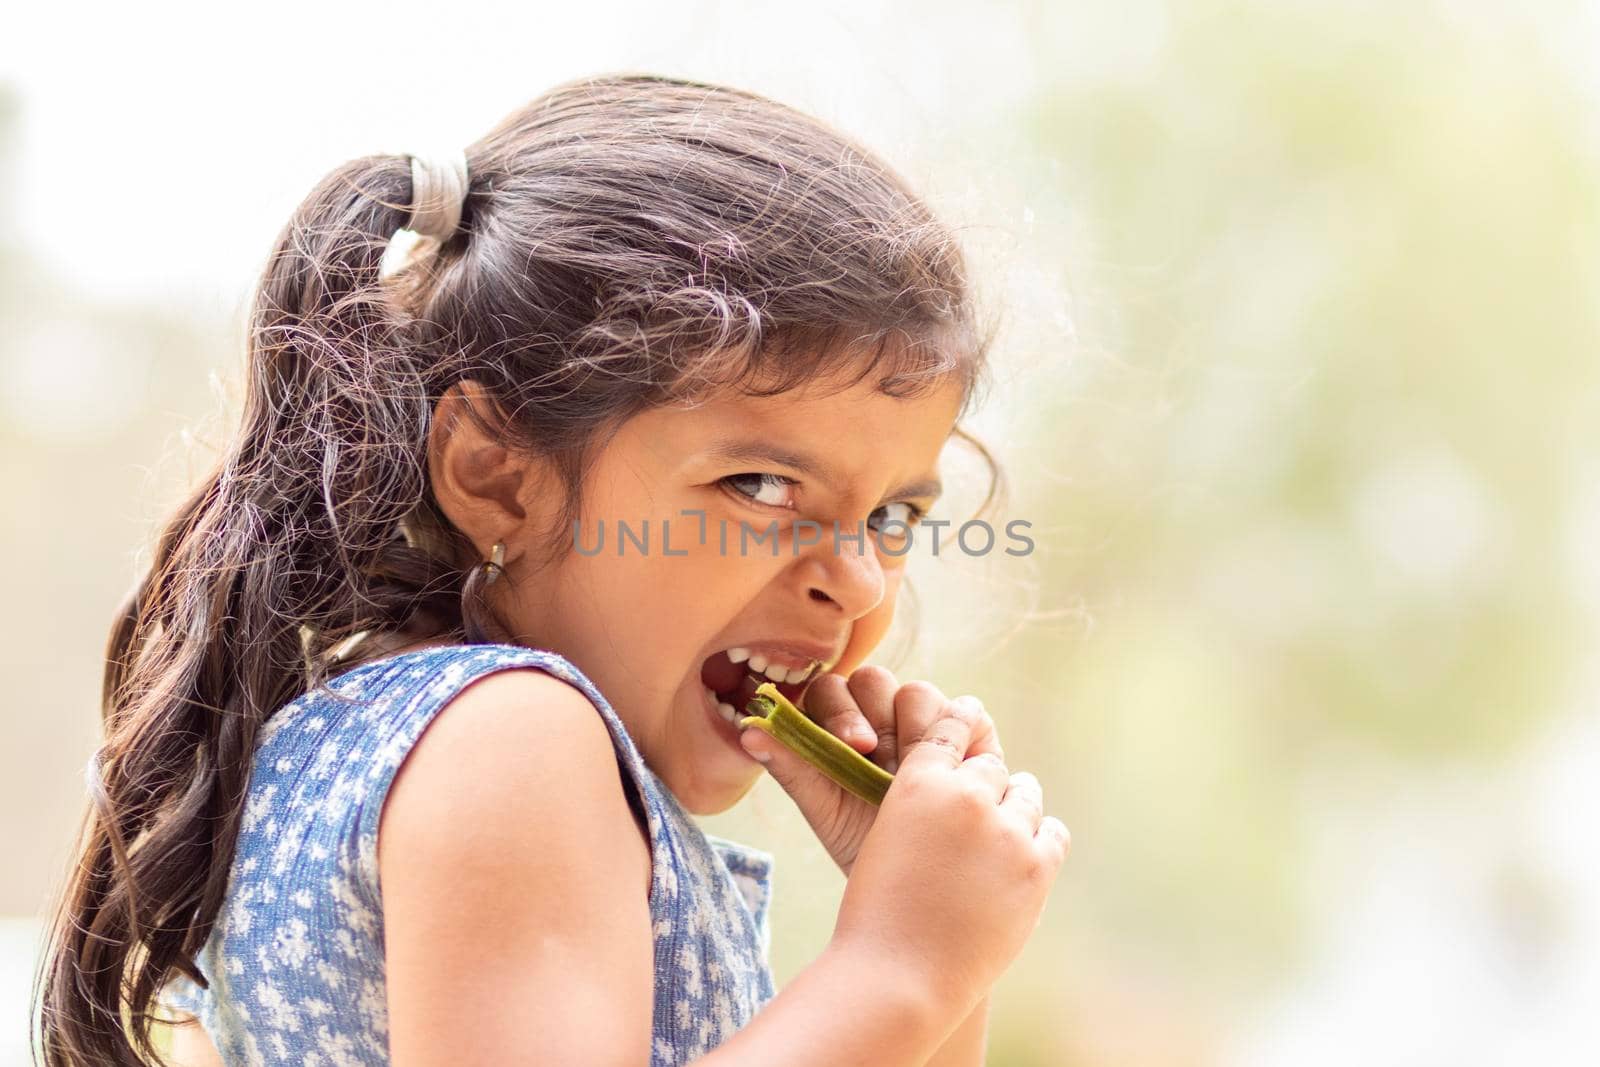 Little girl biting a fruit in the field by eagg13